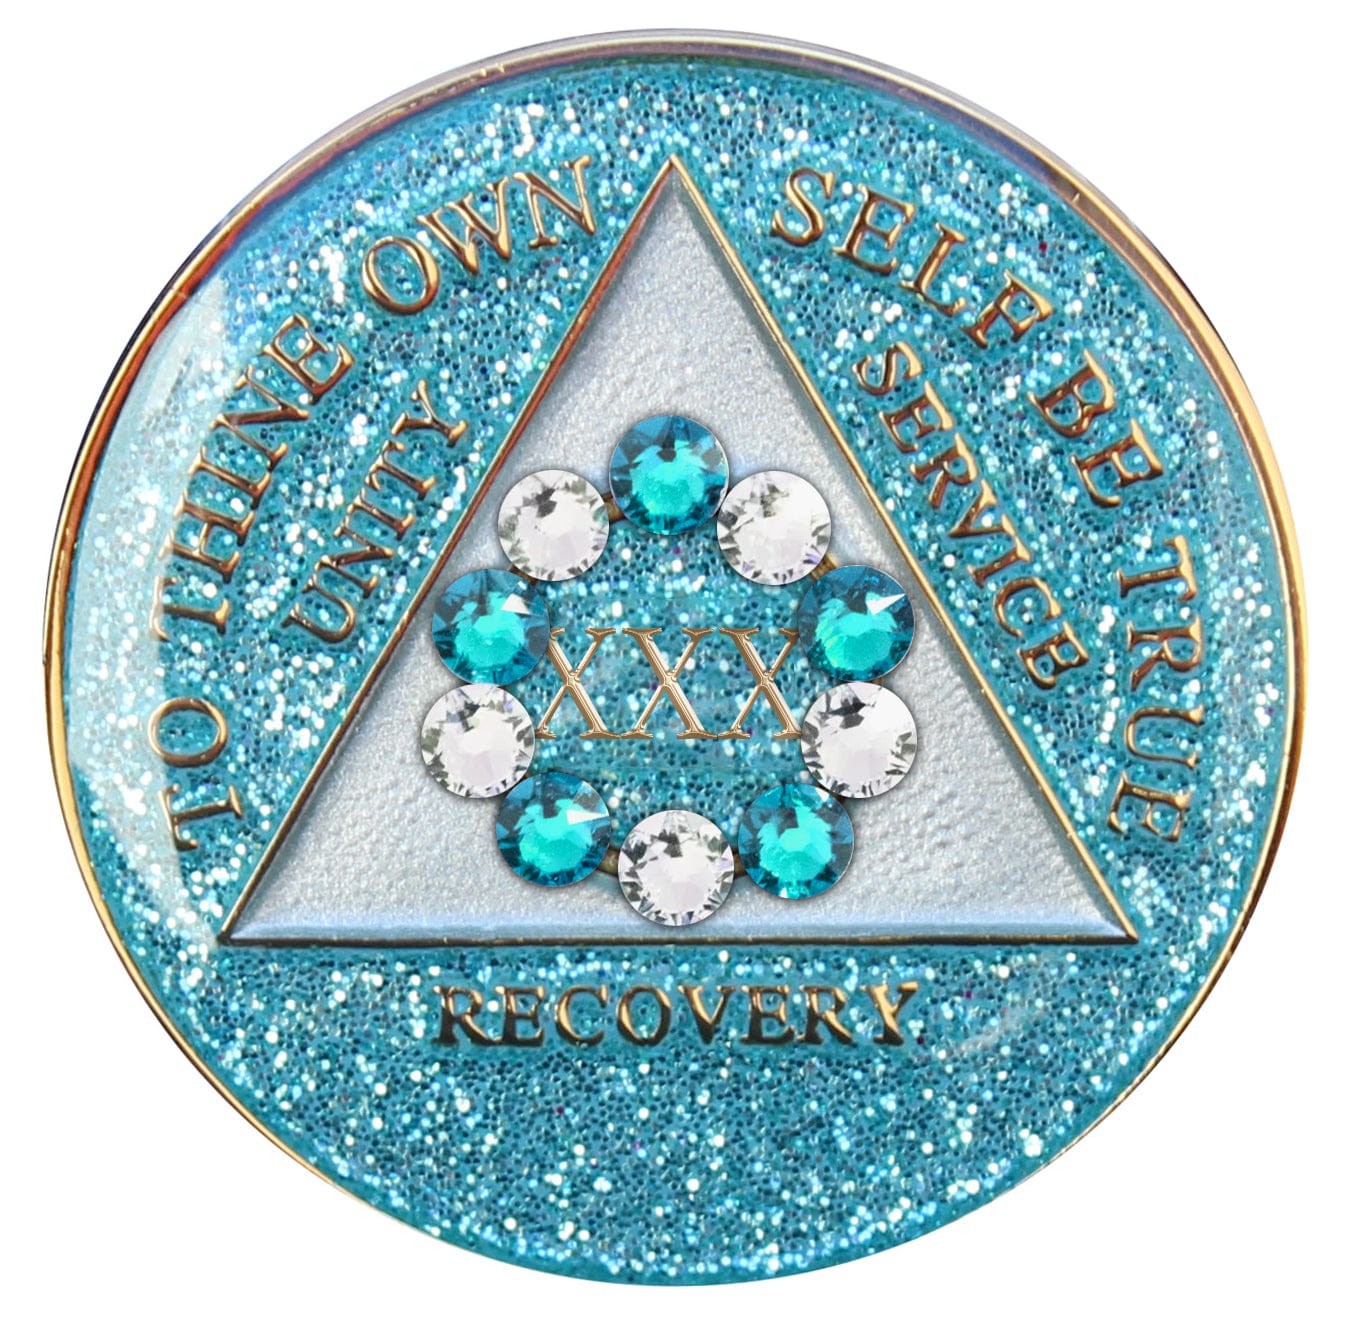 30 Year Deep-sea Aqua glitter 10th step AA medallion with 5 blue genuine crystals and 5 clear genuine crystal, formed in a circle around the year, to thine own self be true, triangle in the center and unity, service, recovery, along with rim of medallion are slightly raised in 14k gold, the center of the triangle is pearl white with the circle being aqua glitter, all emphasizing action and reflection.